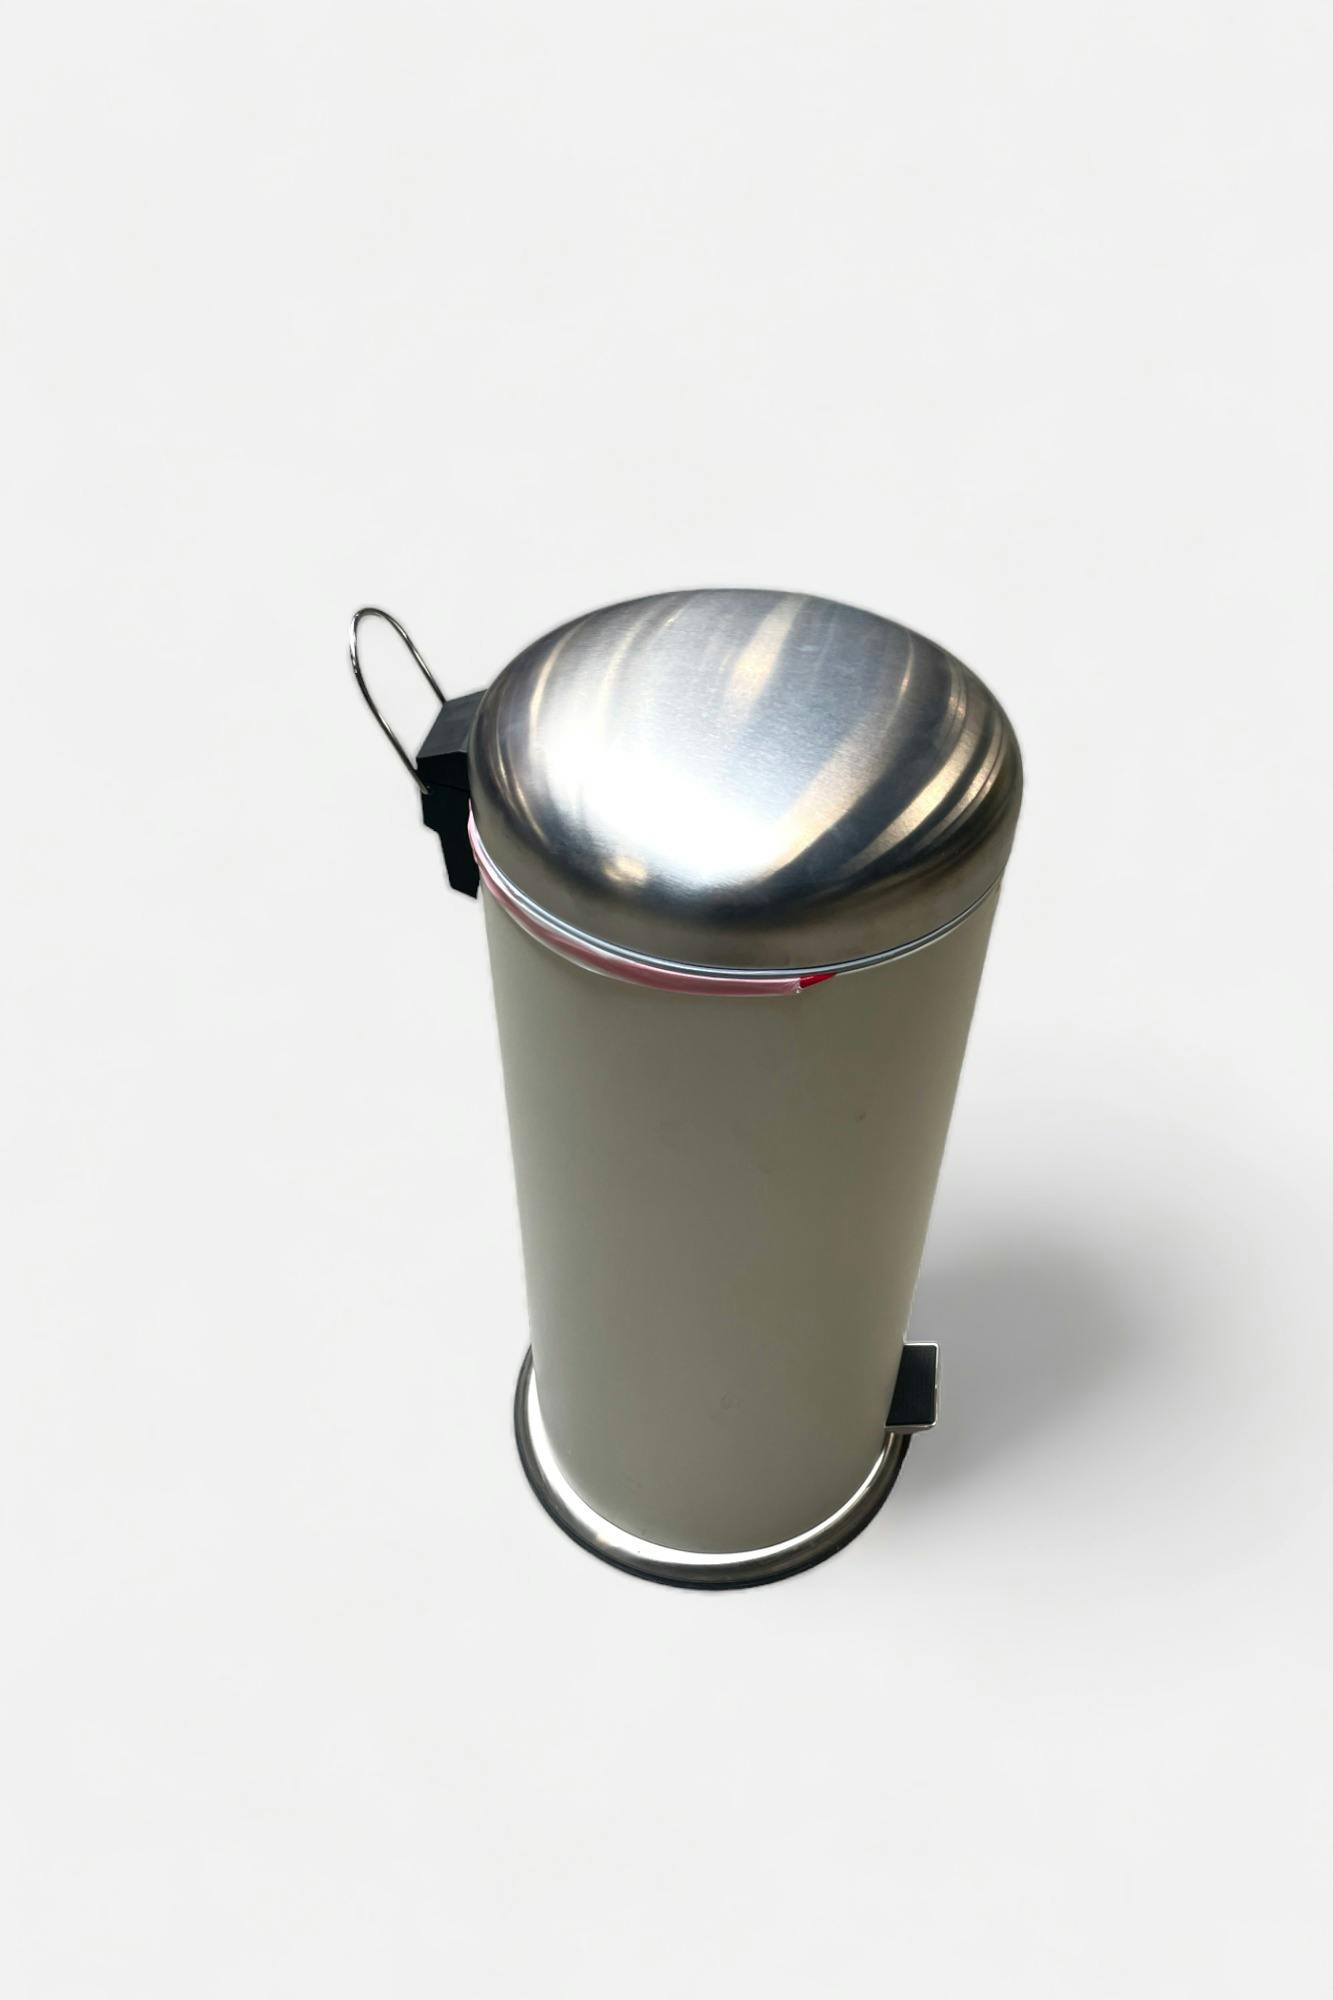 White metal garbage can - Relieve Furniture